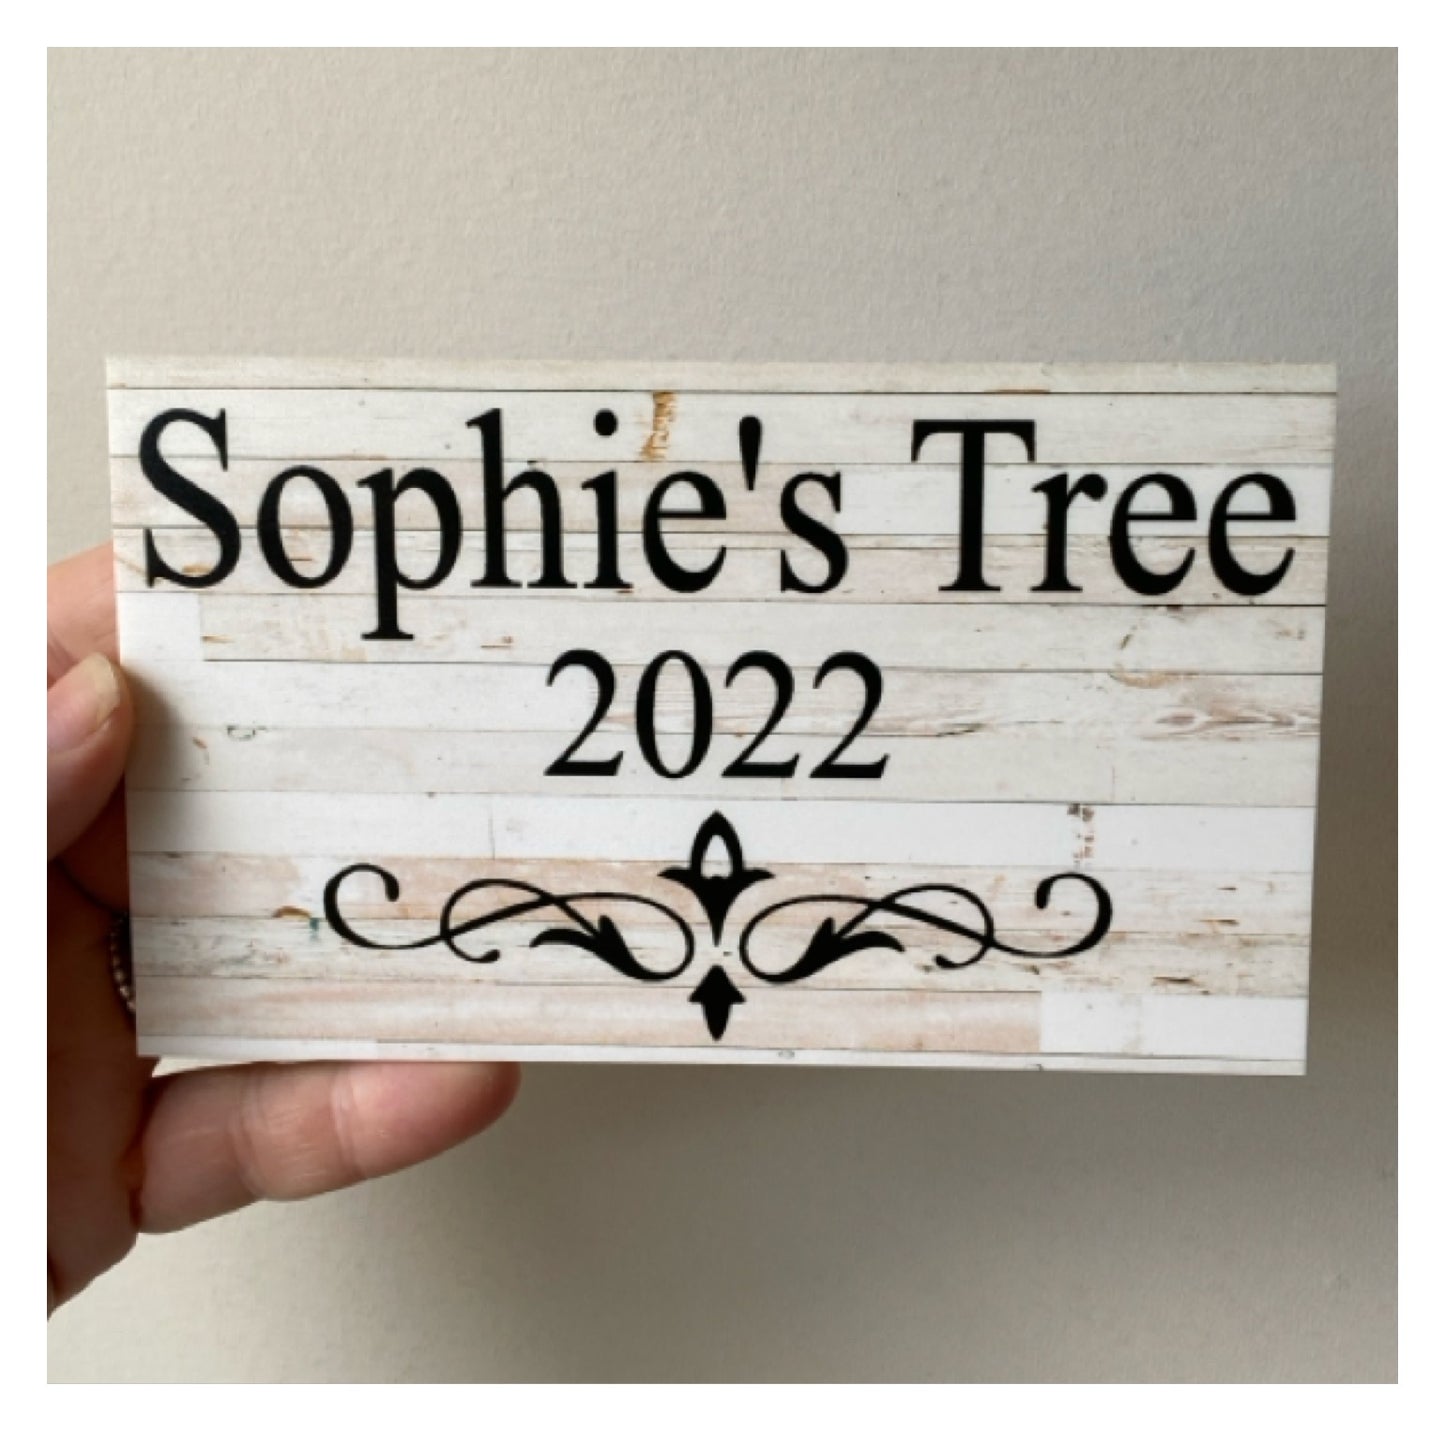 Custom Personalised White Wash Scroll Sign - The Renmy Store Homewares & Gifts 